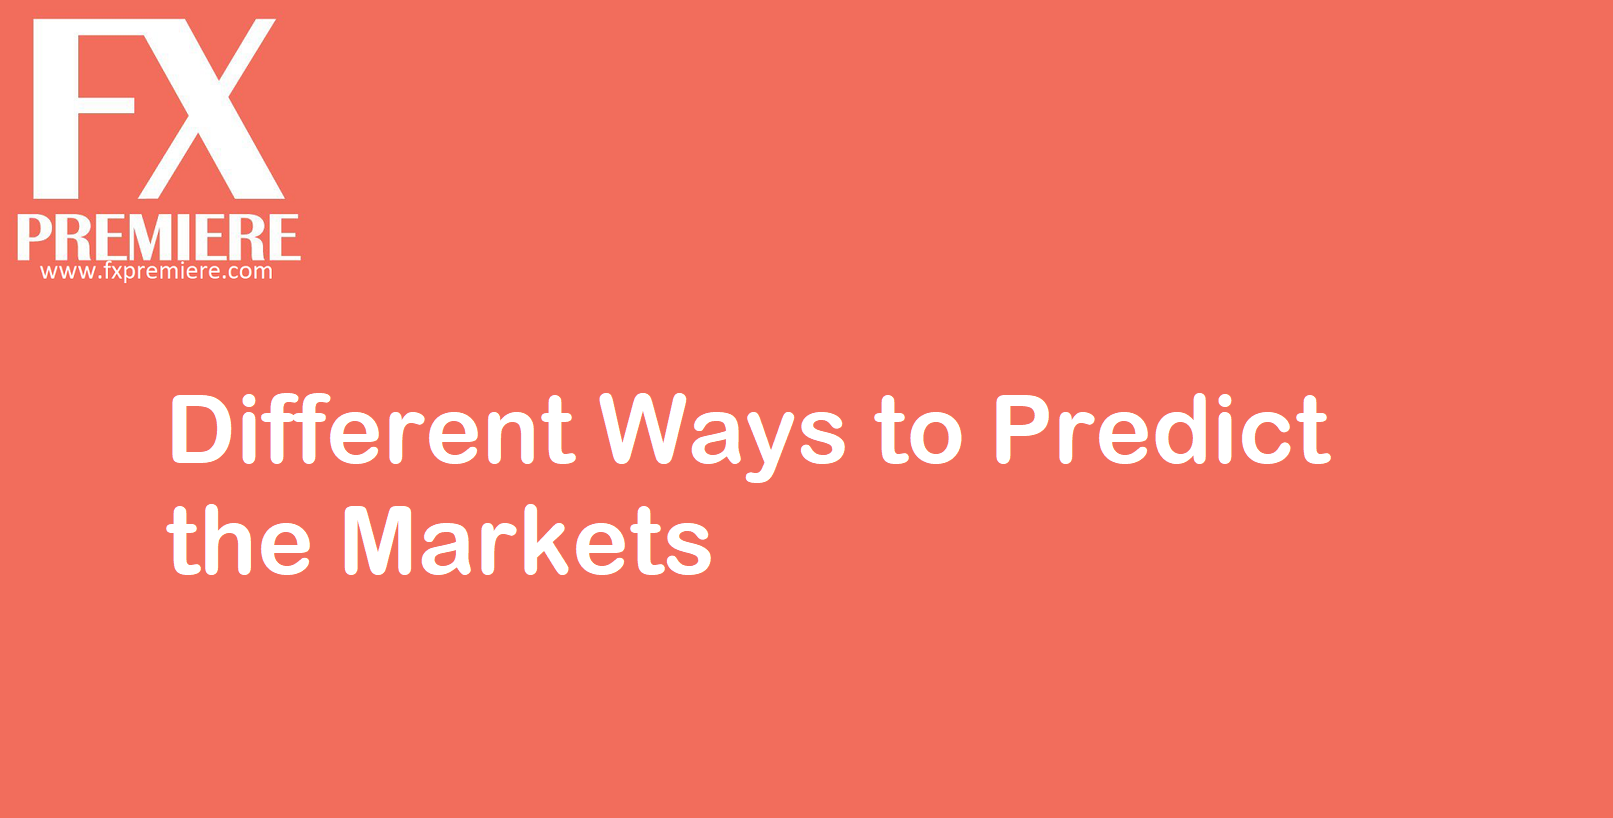 Different Ways to Predict the Markets